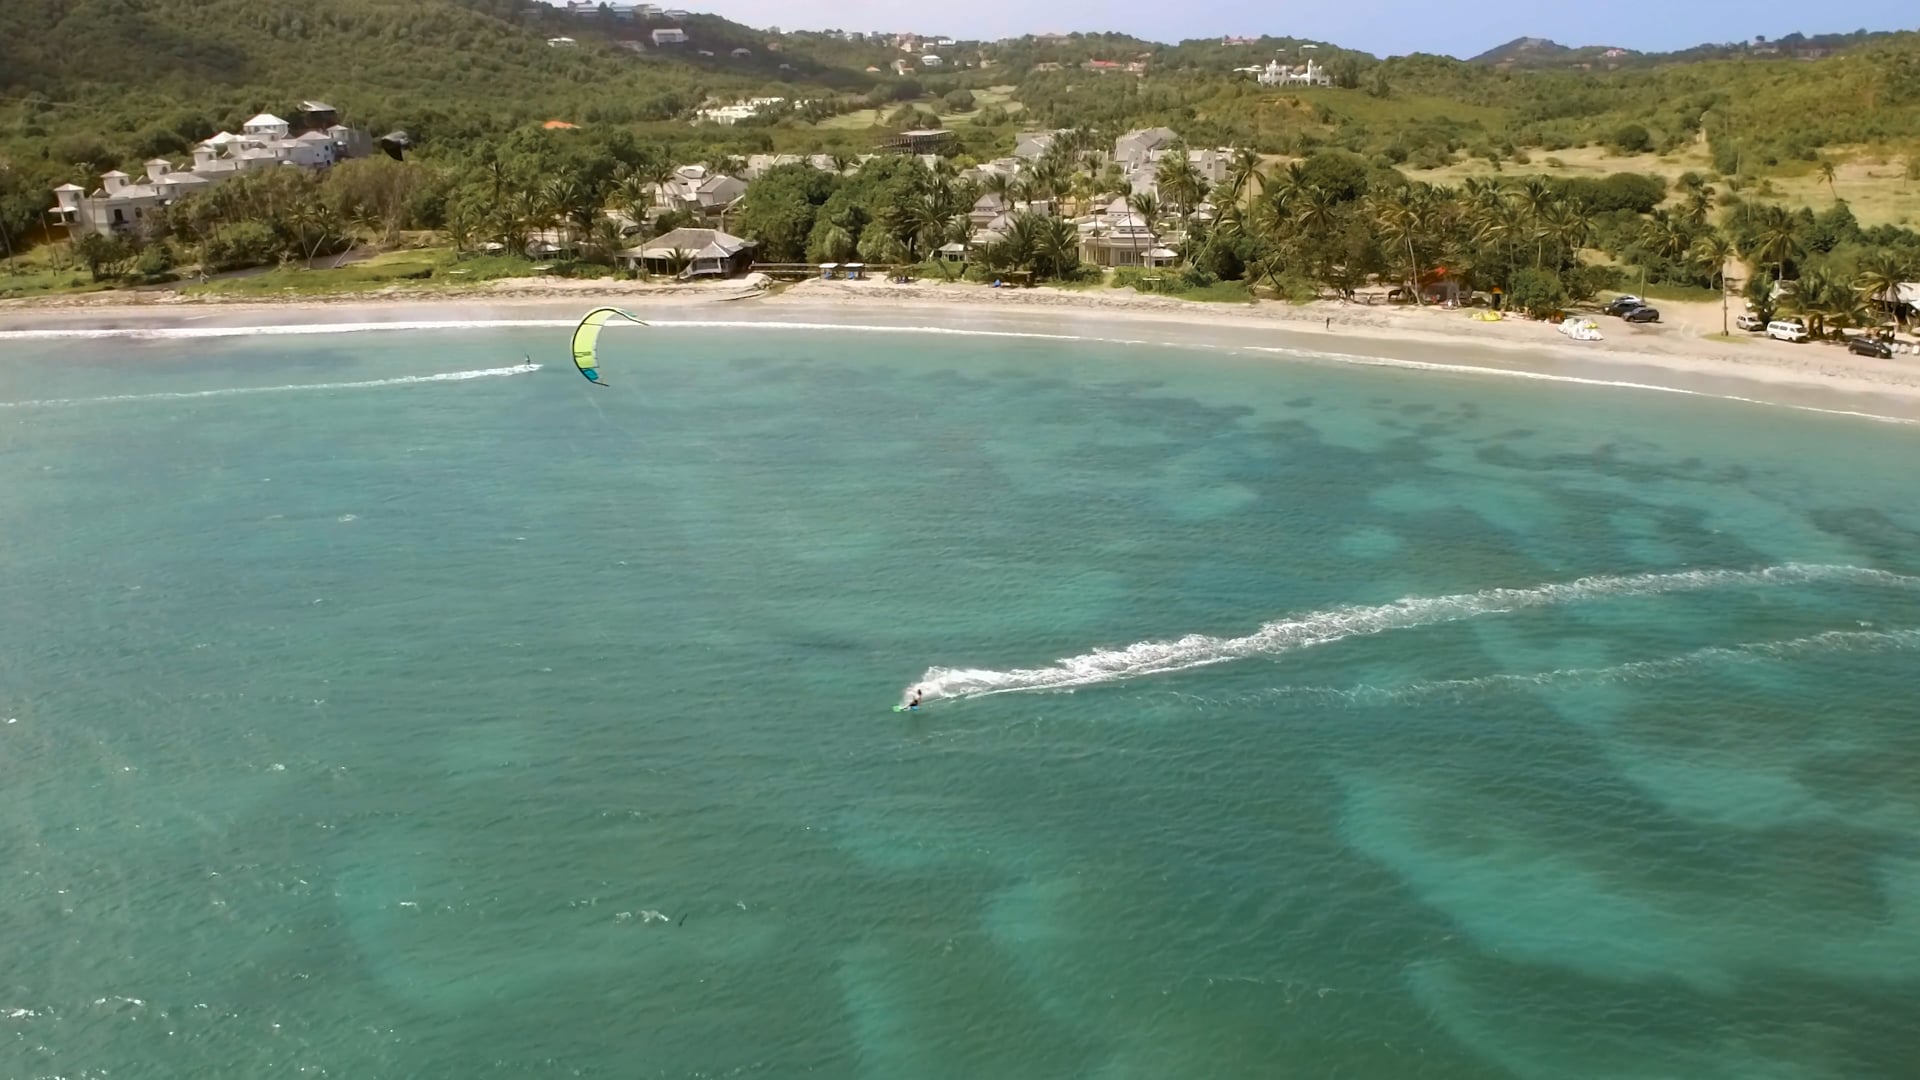 Kite Surfers St Lucia filmed by Graeme Taplin @Drone Photography